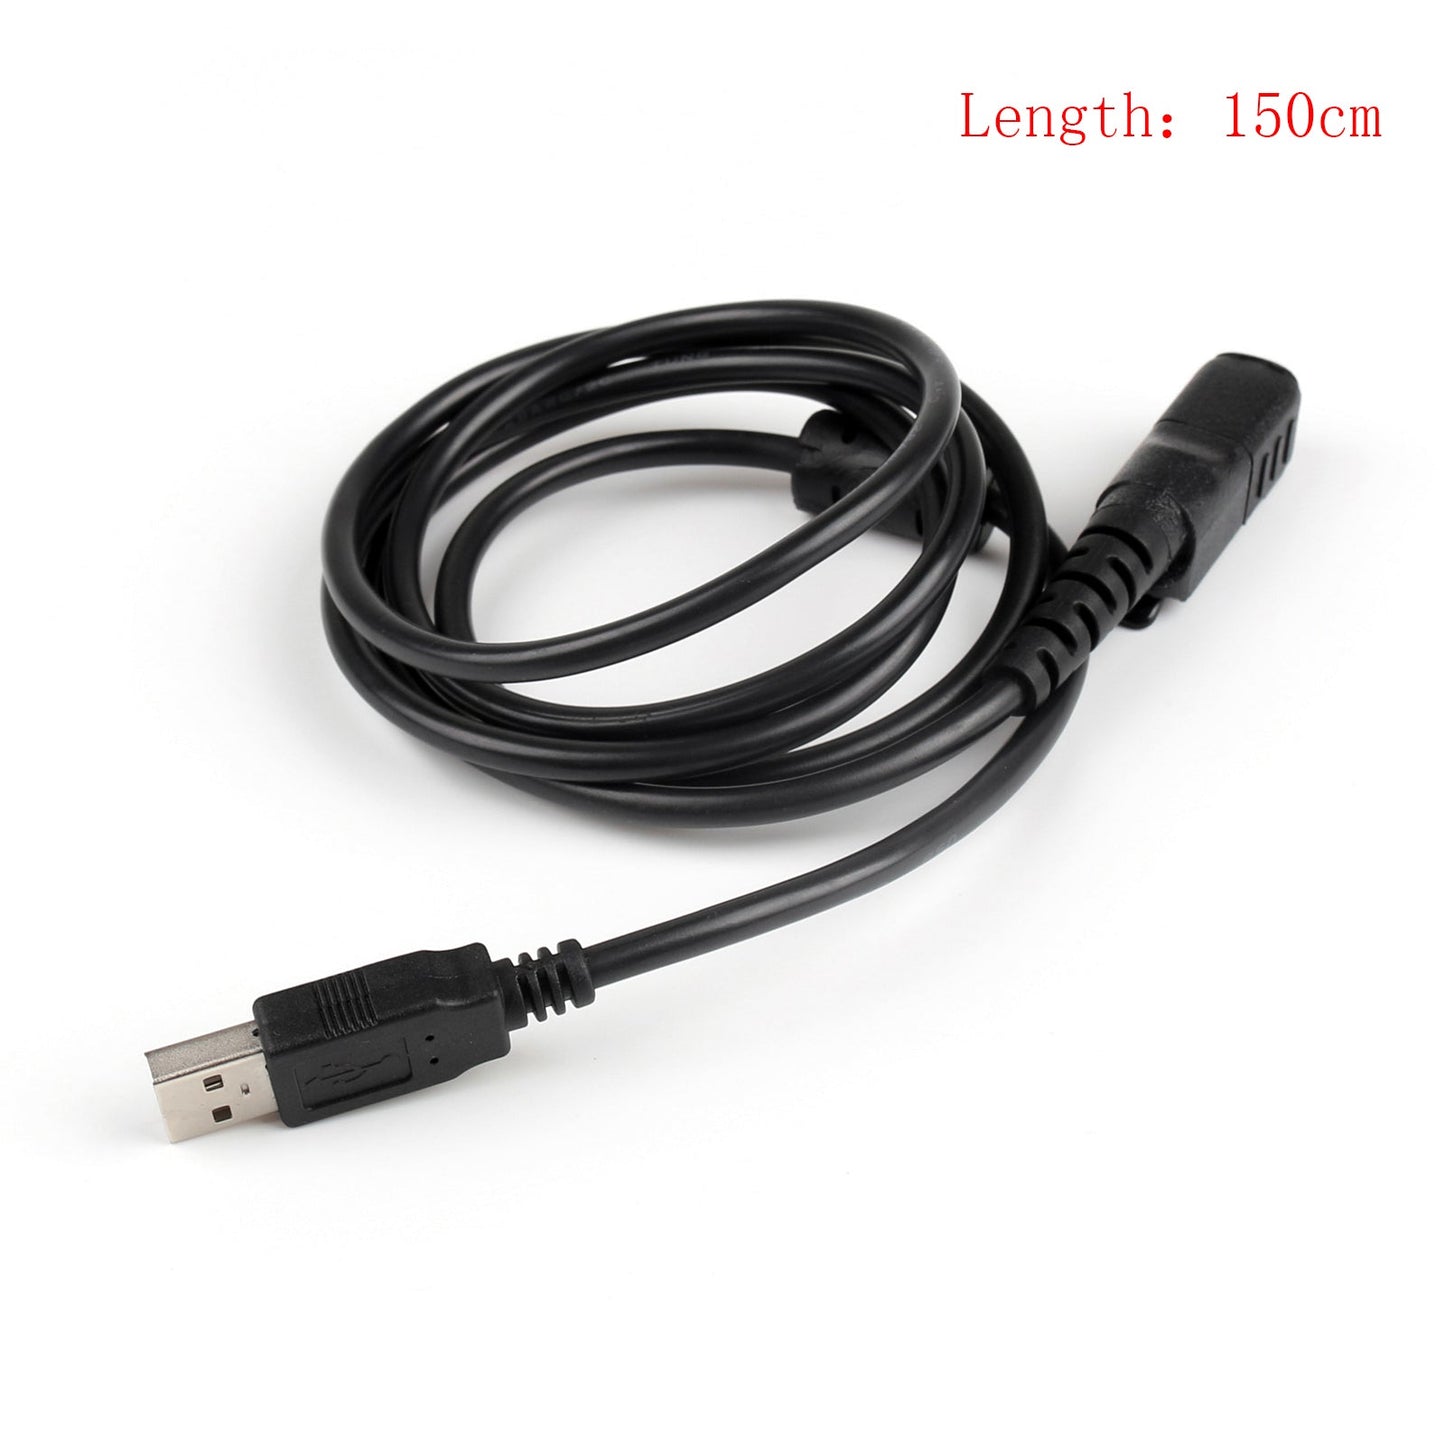 1x USB Programming Cable For XIR P6600/6620 XPR3300/3500 MTP3100 DP3441